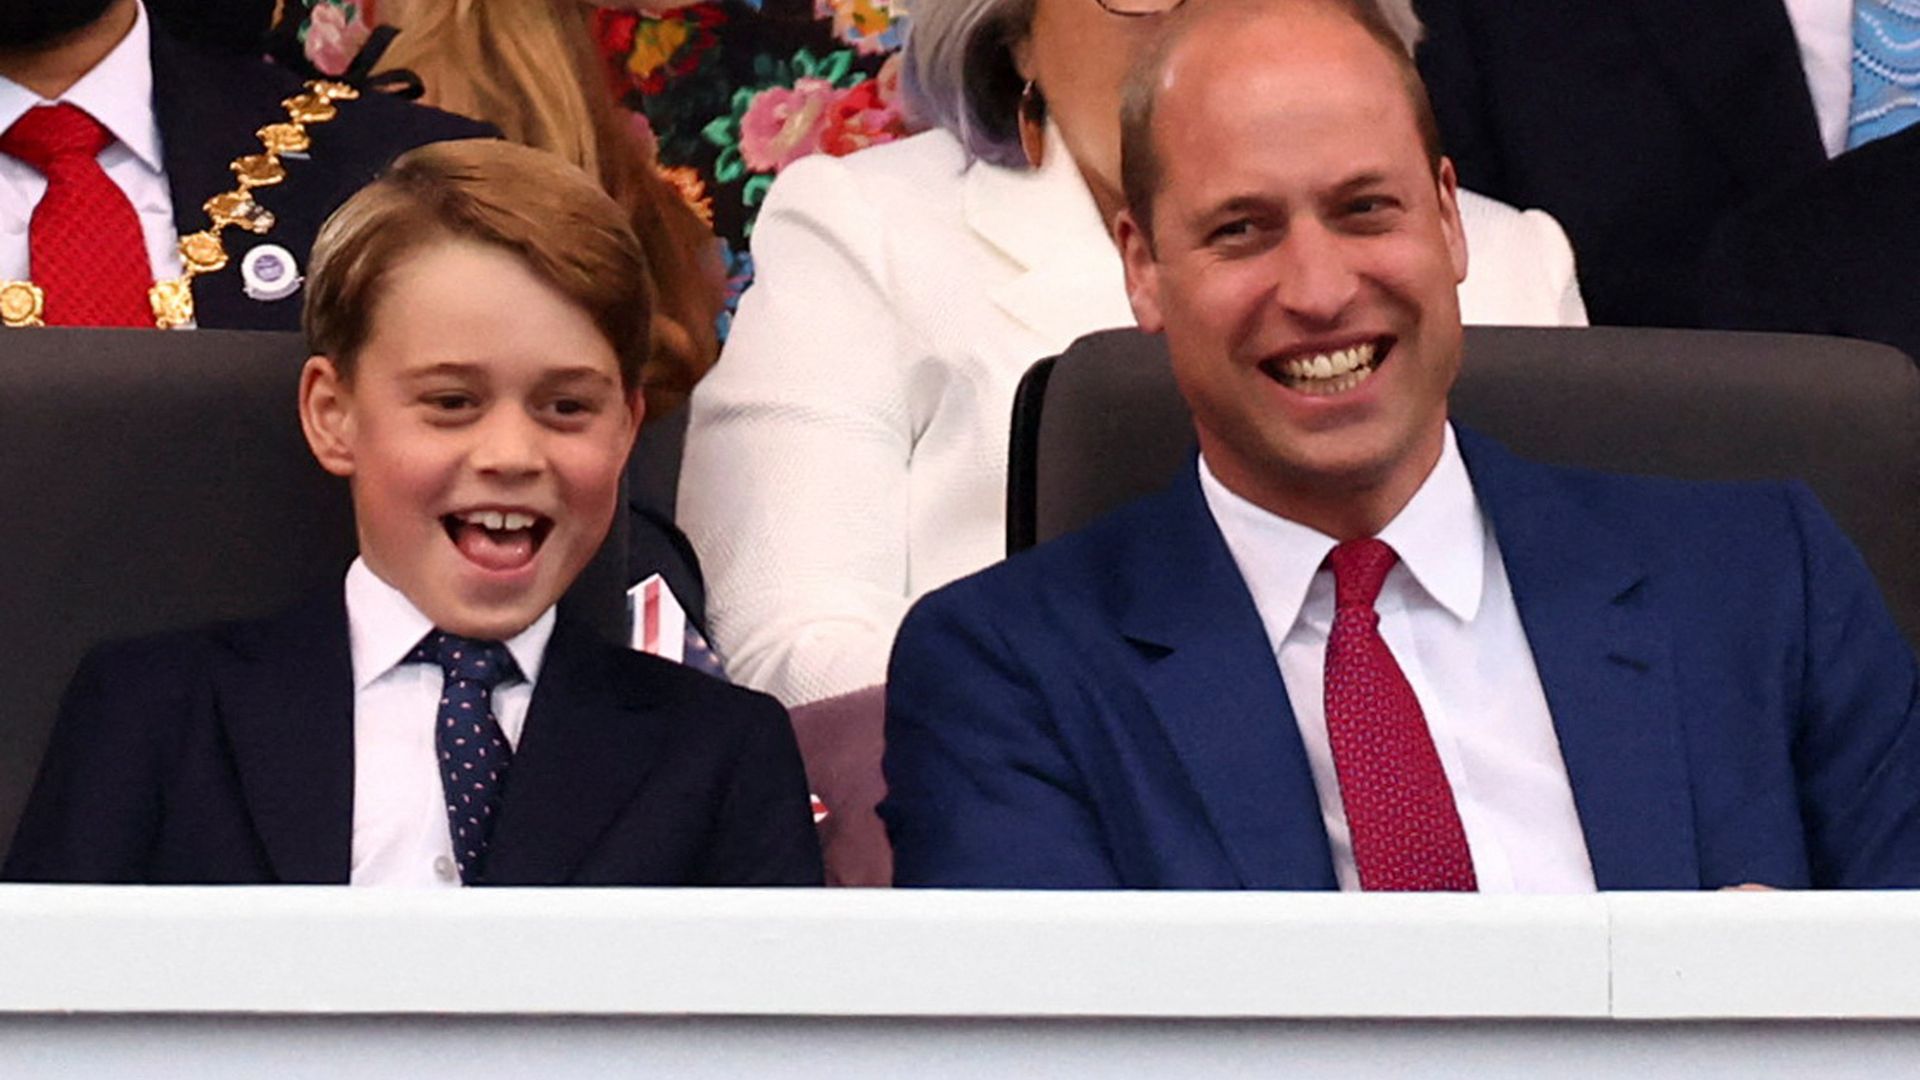 A close-up image of Prince George and Prince William